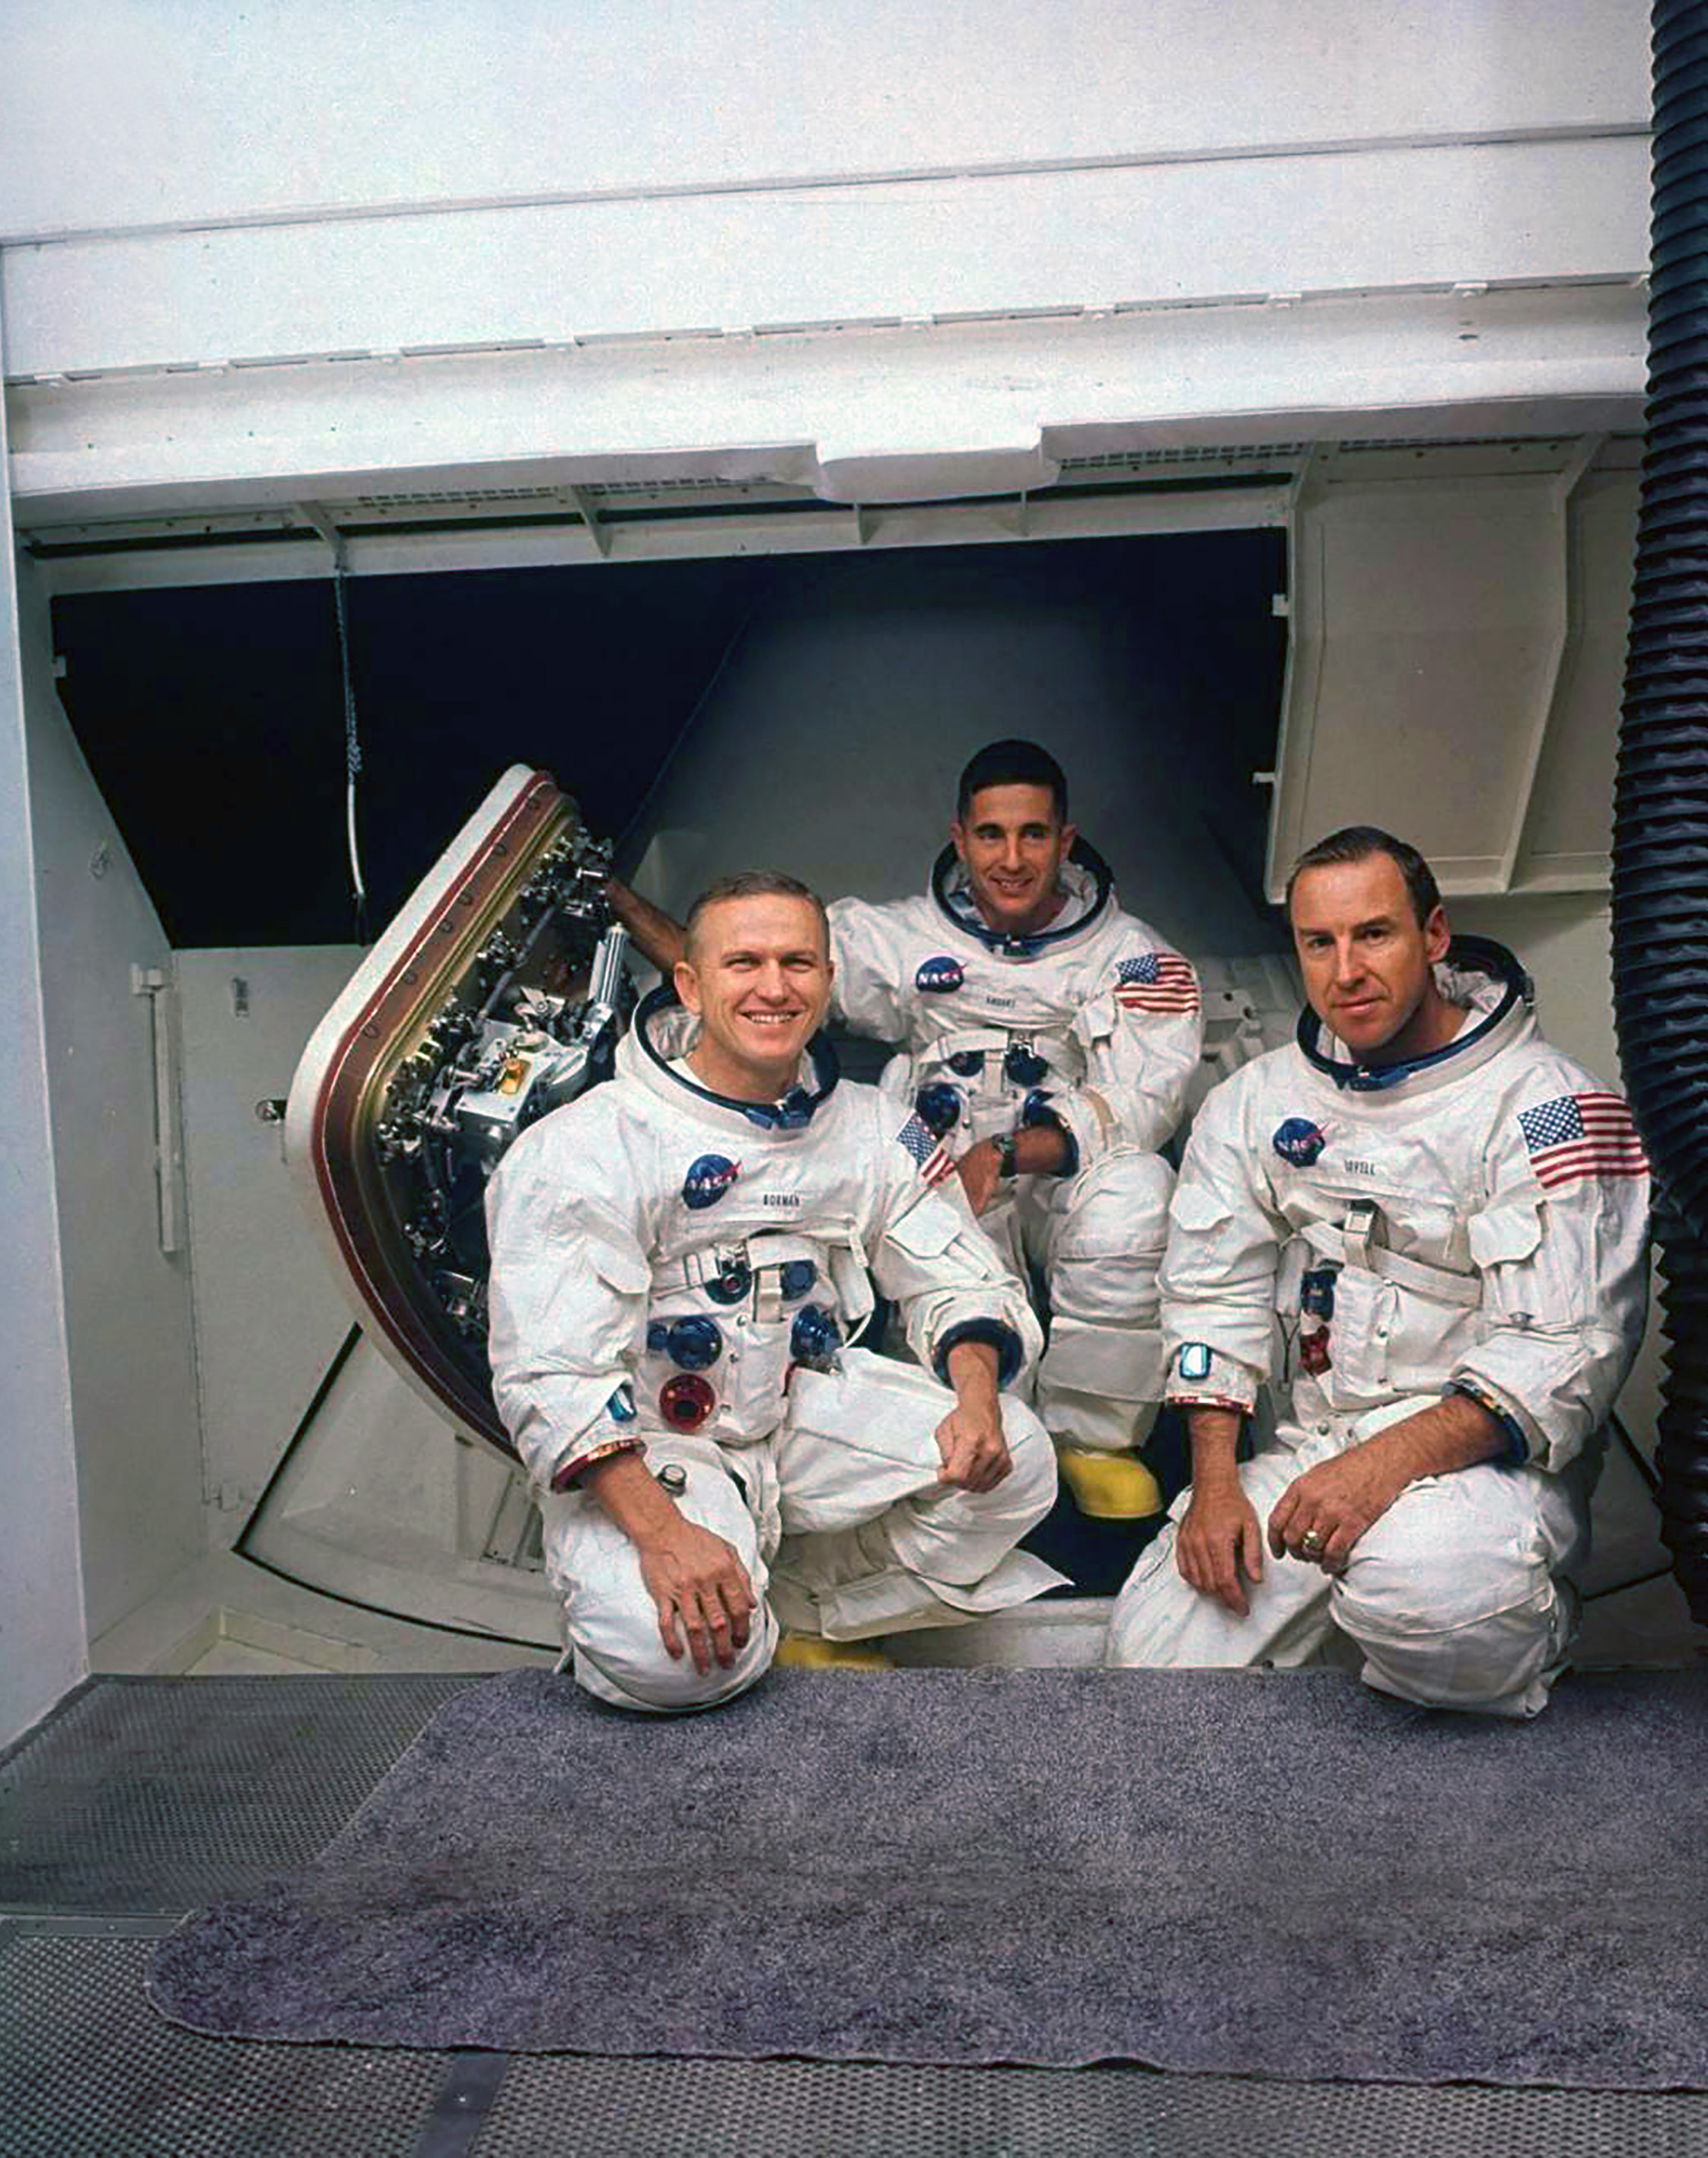 Crewmembers (left to right) Borman, Anders, and Lovell pose outside the simulator